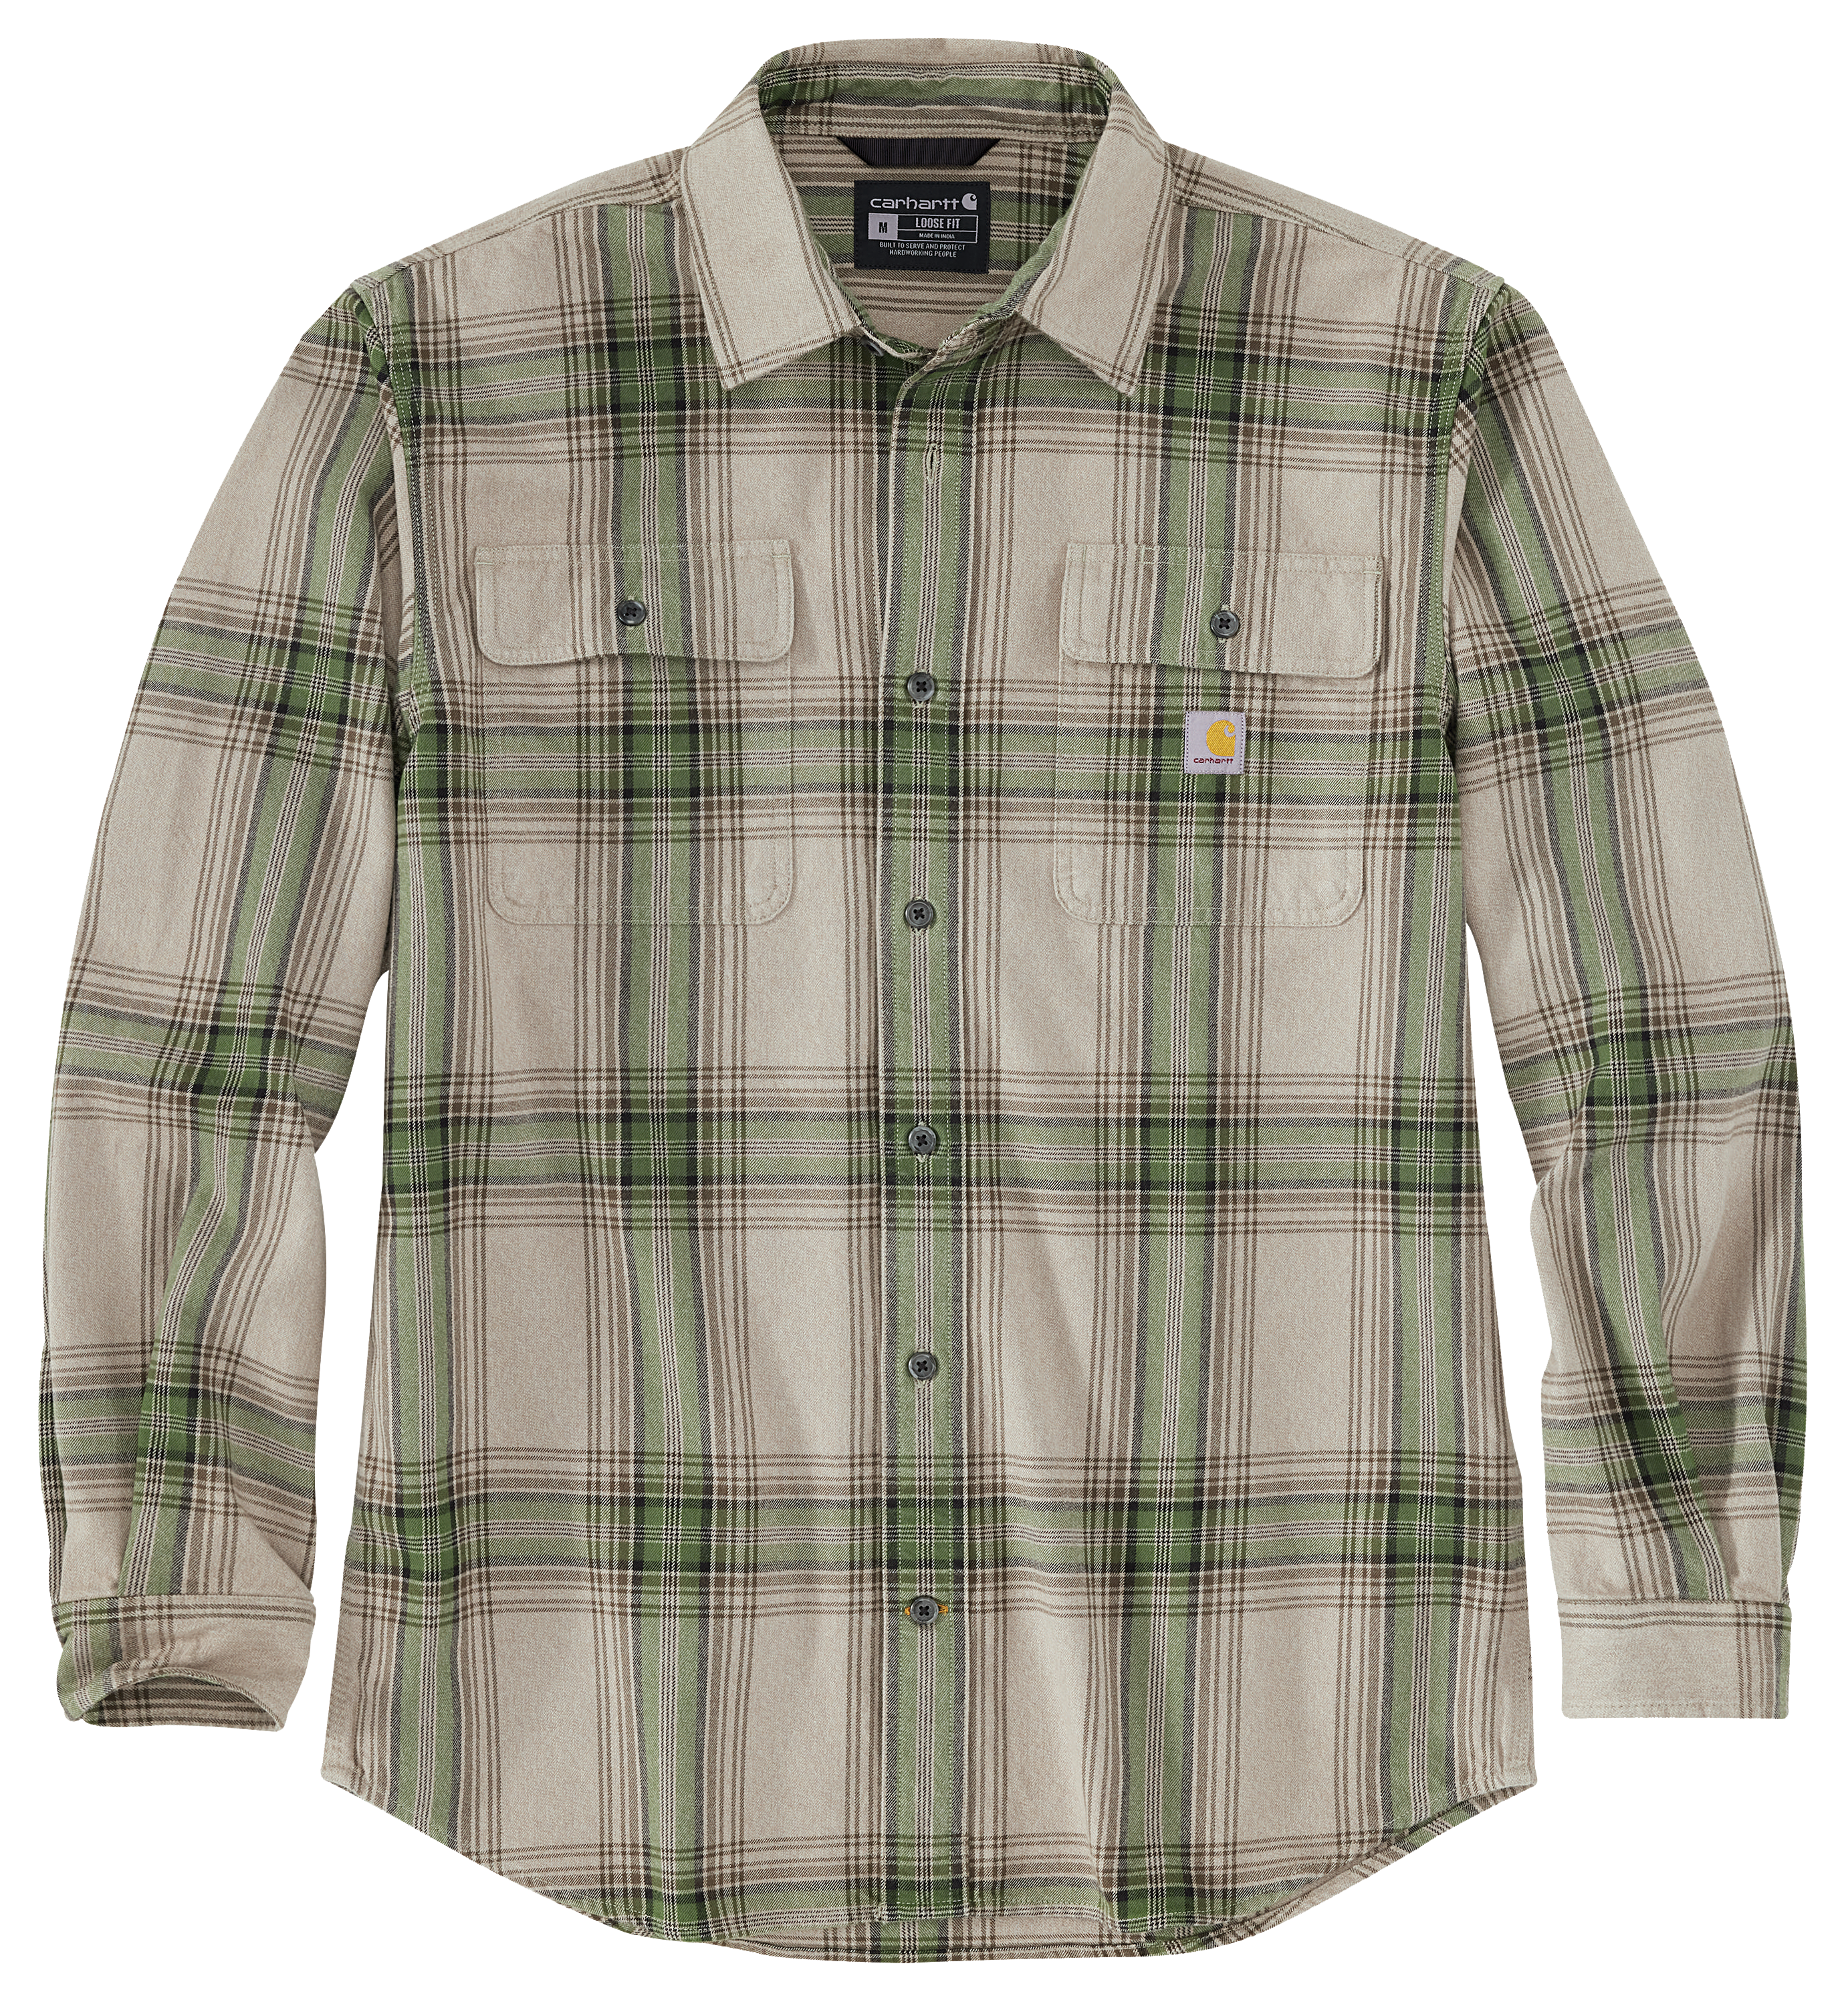 Carhartt Loose-Fit Heavyweight Flannel Plaid Long-Sleeve Button-Down Shirt for Men - Chive - 3XLT